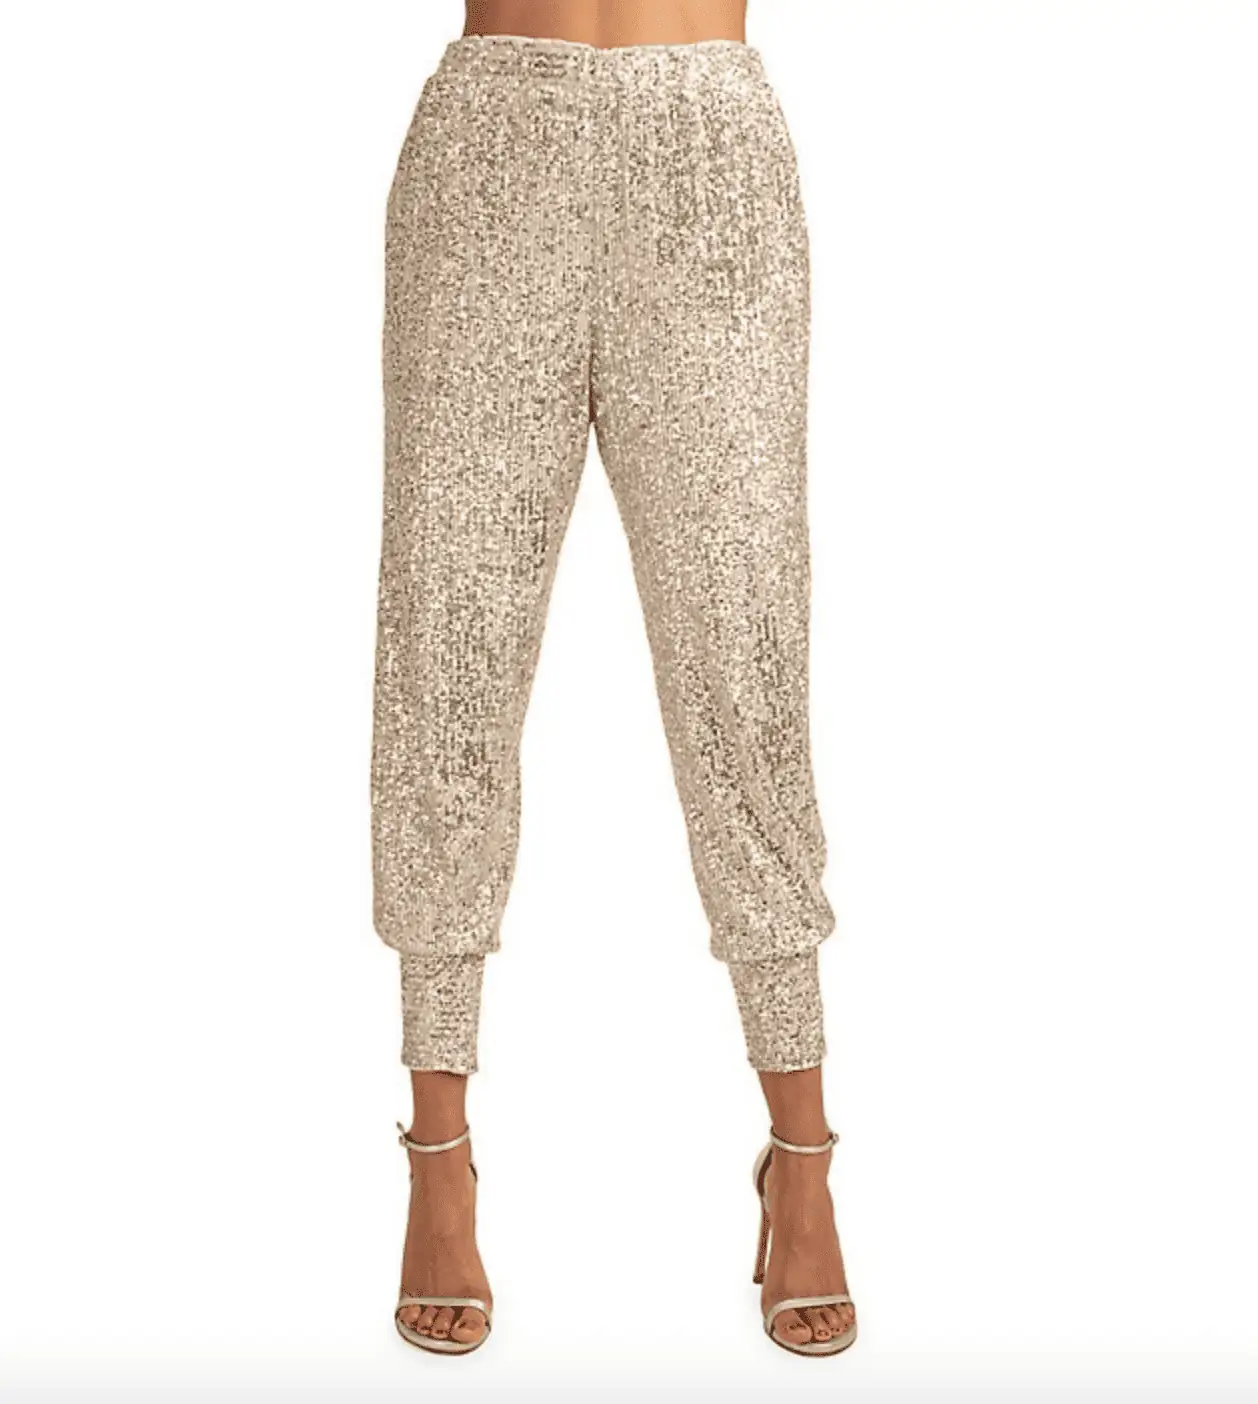 Taylor Armstrong's Sequin Joggers